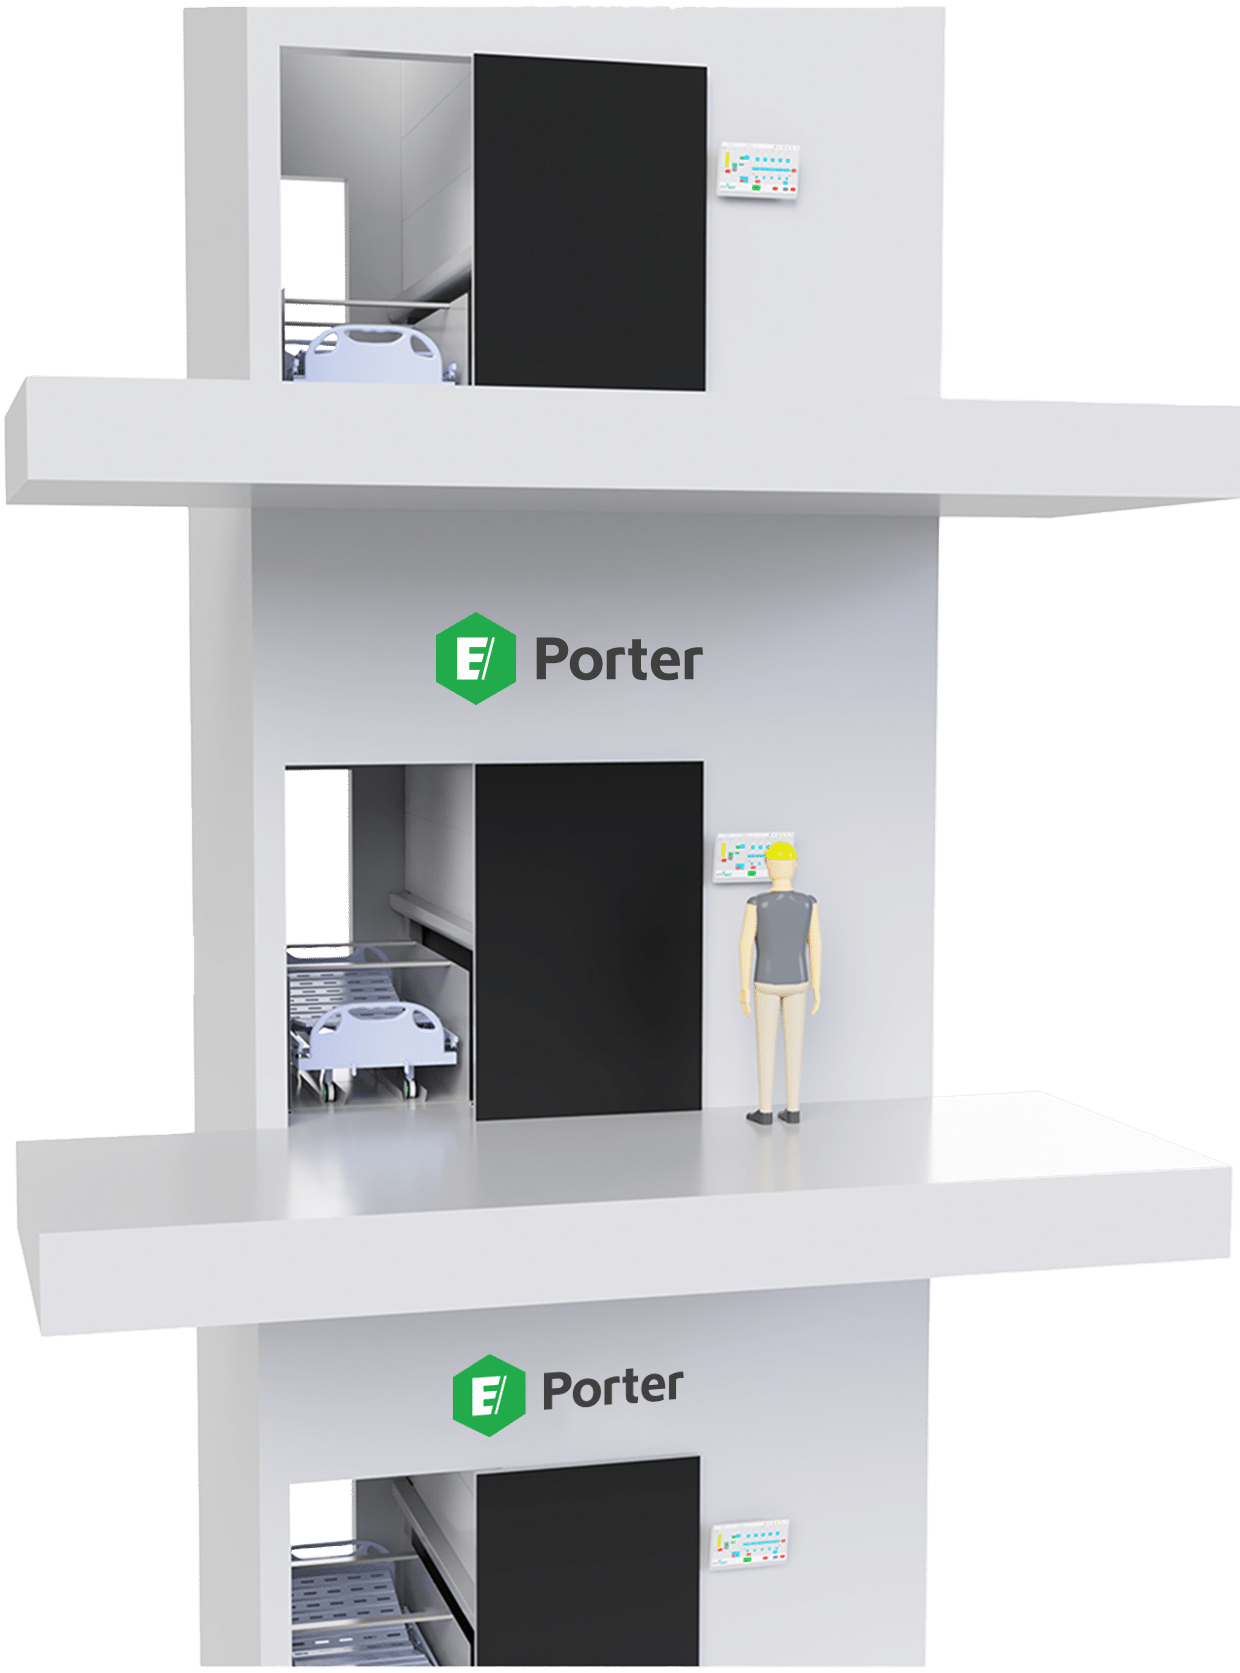 E/Porter specialised storage and transport module tailored for hospital beds